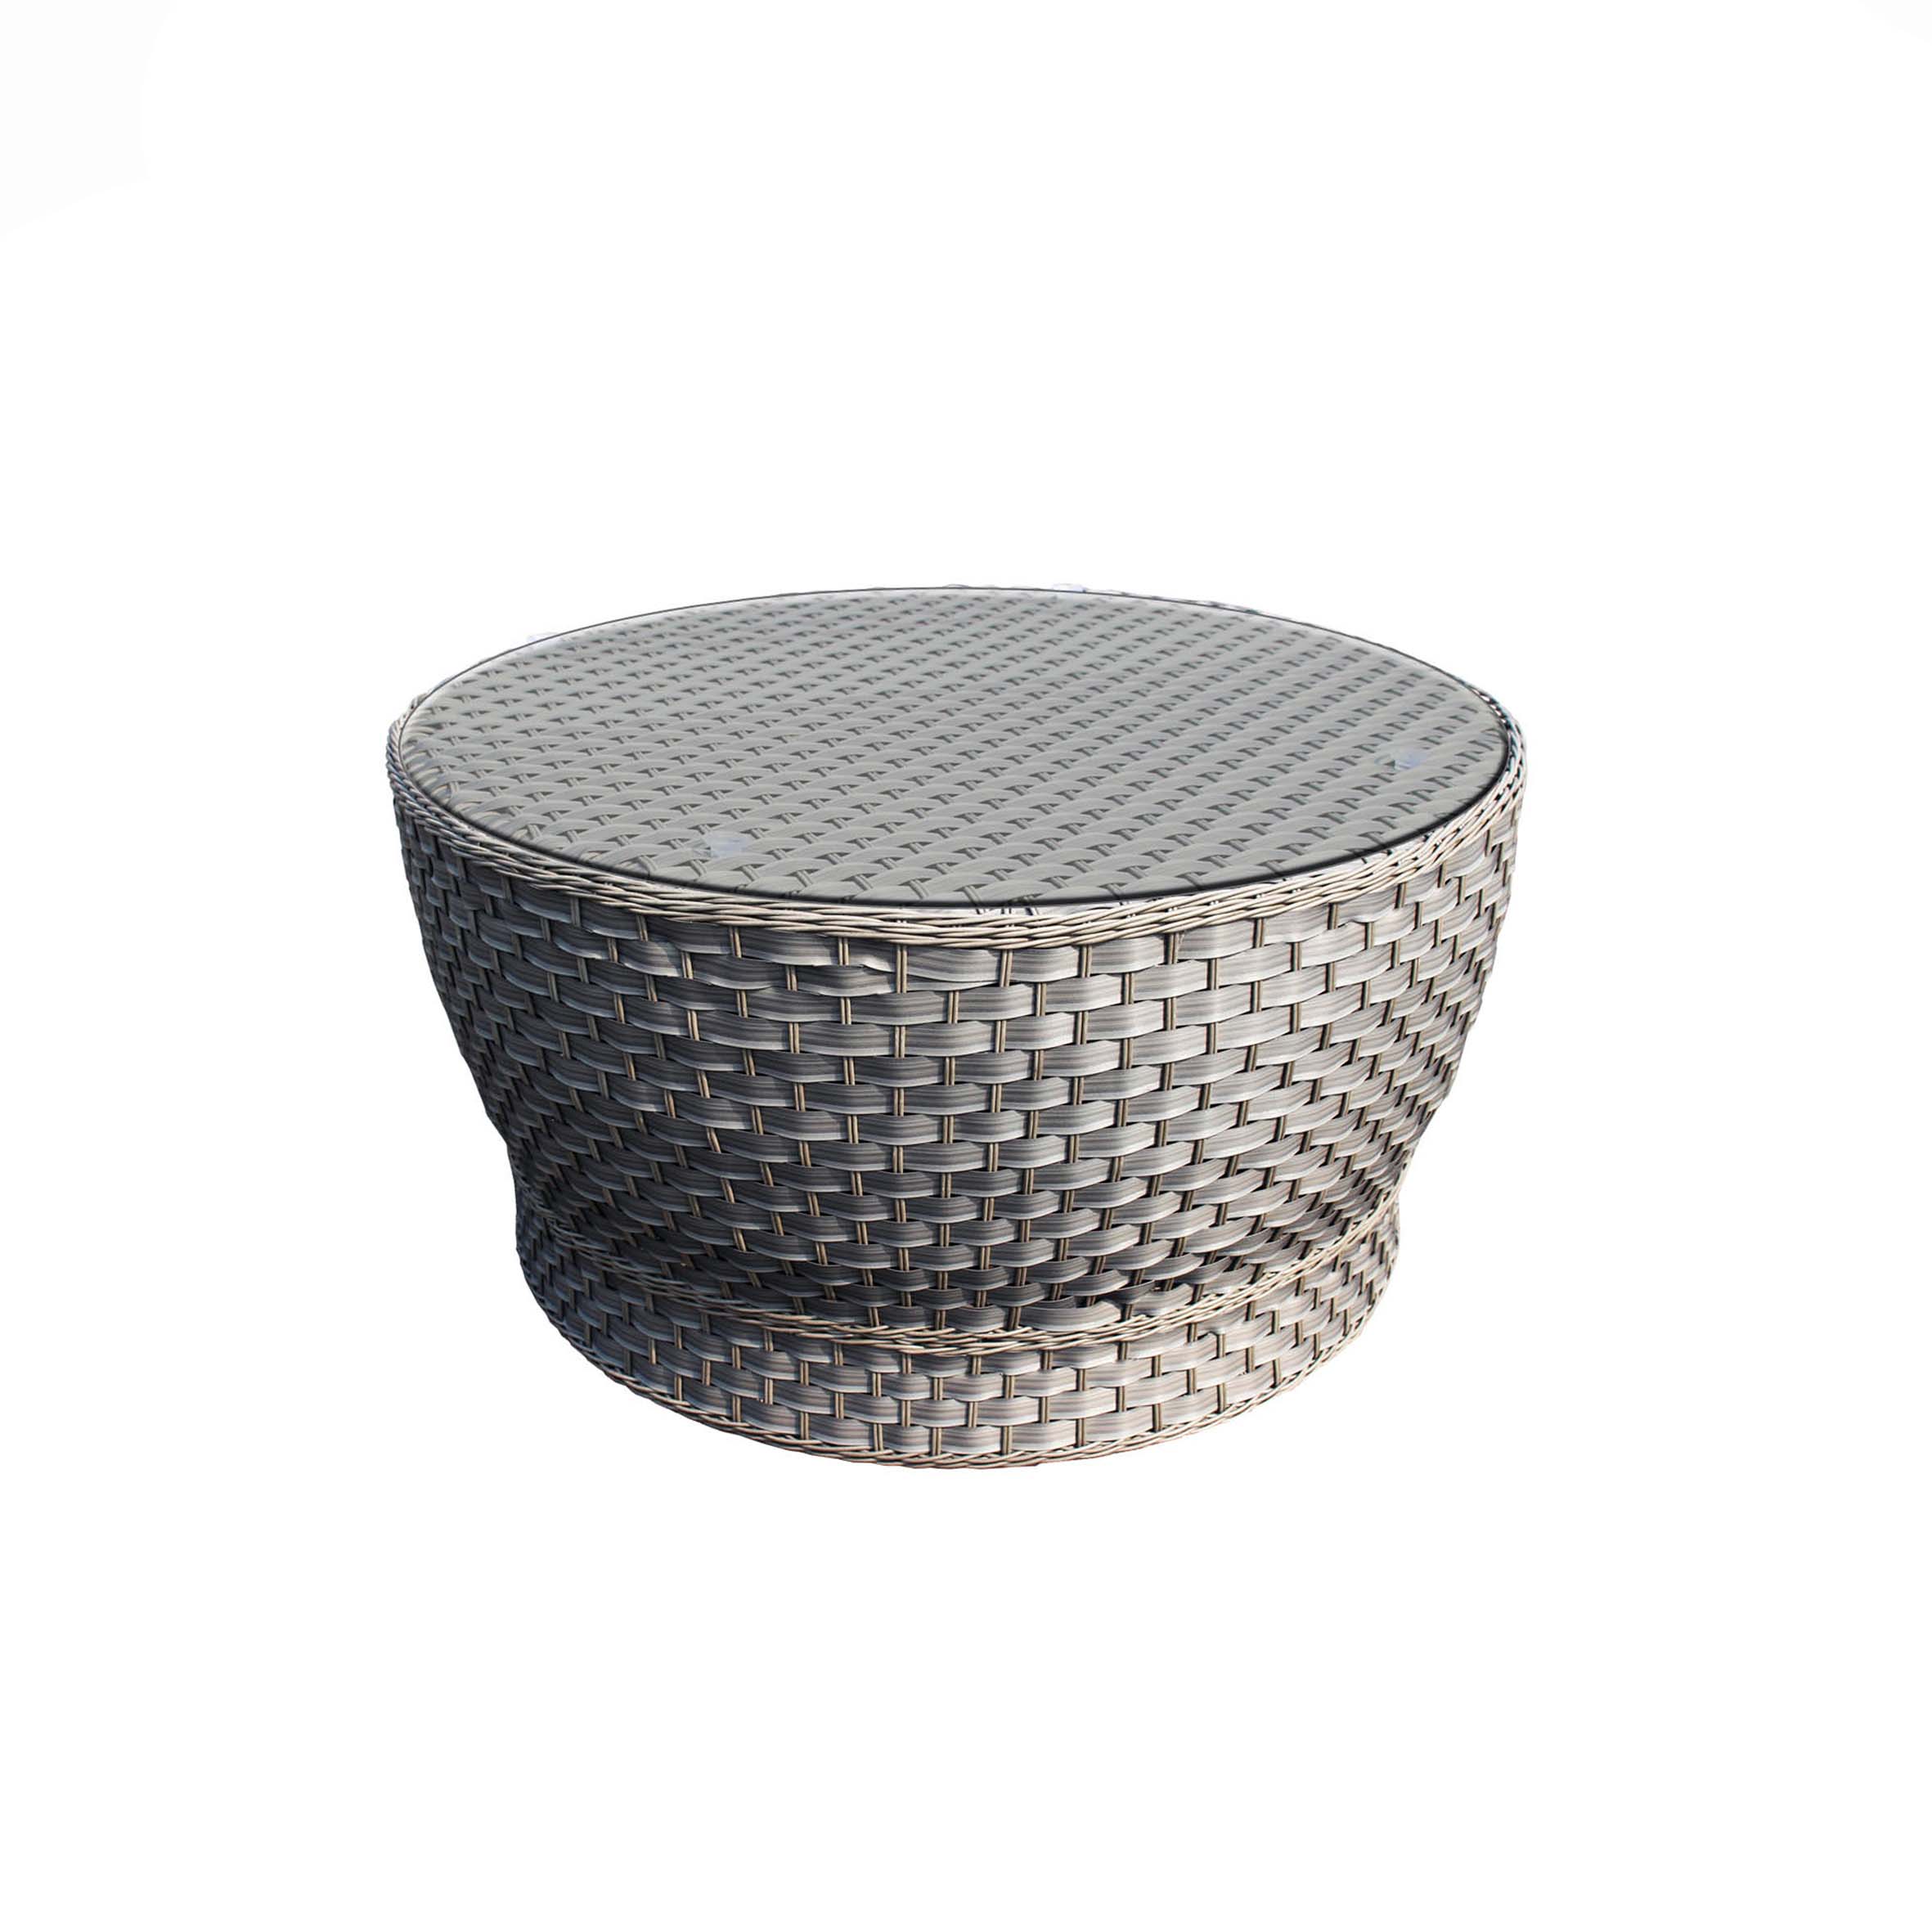 Master rattan round coffee table S2